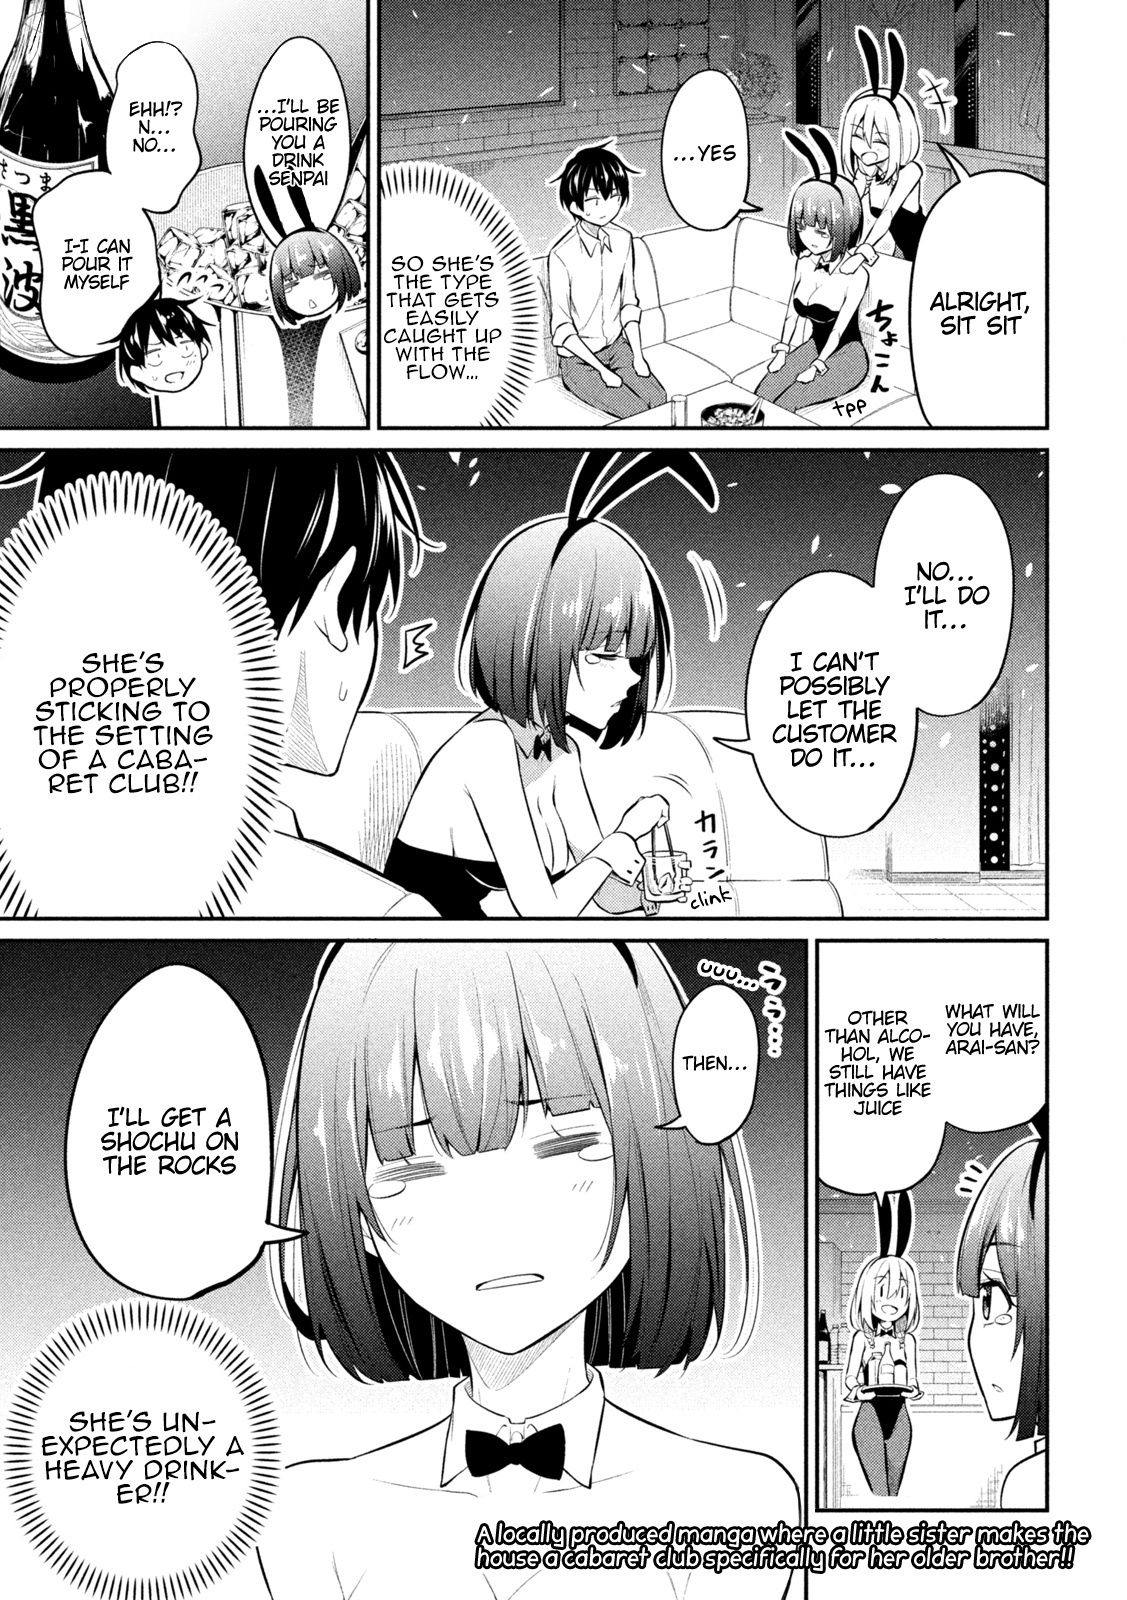 Home Cabaret ~Operation: Making A Cabaret Club At Home So Nii-Chan Can Get Used To Girls~ - Page 2